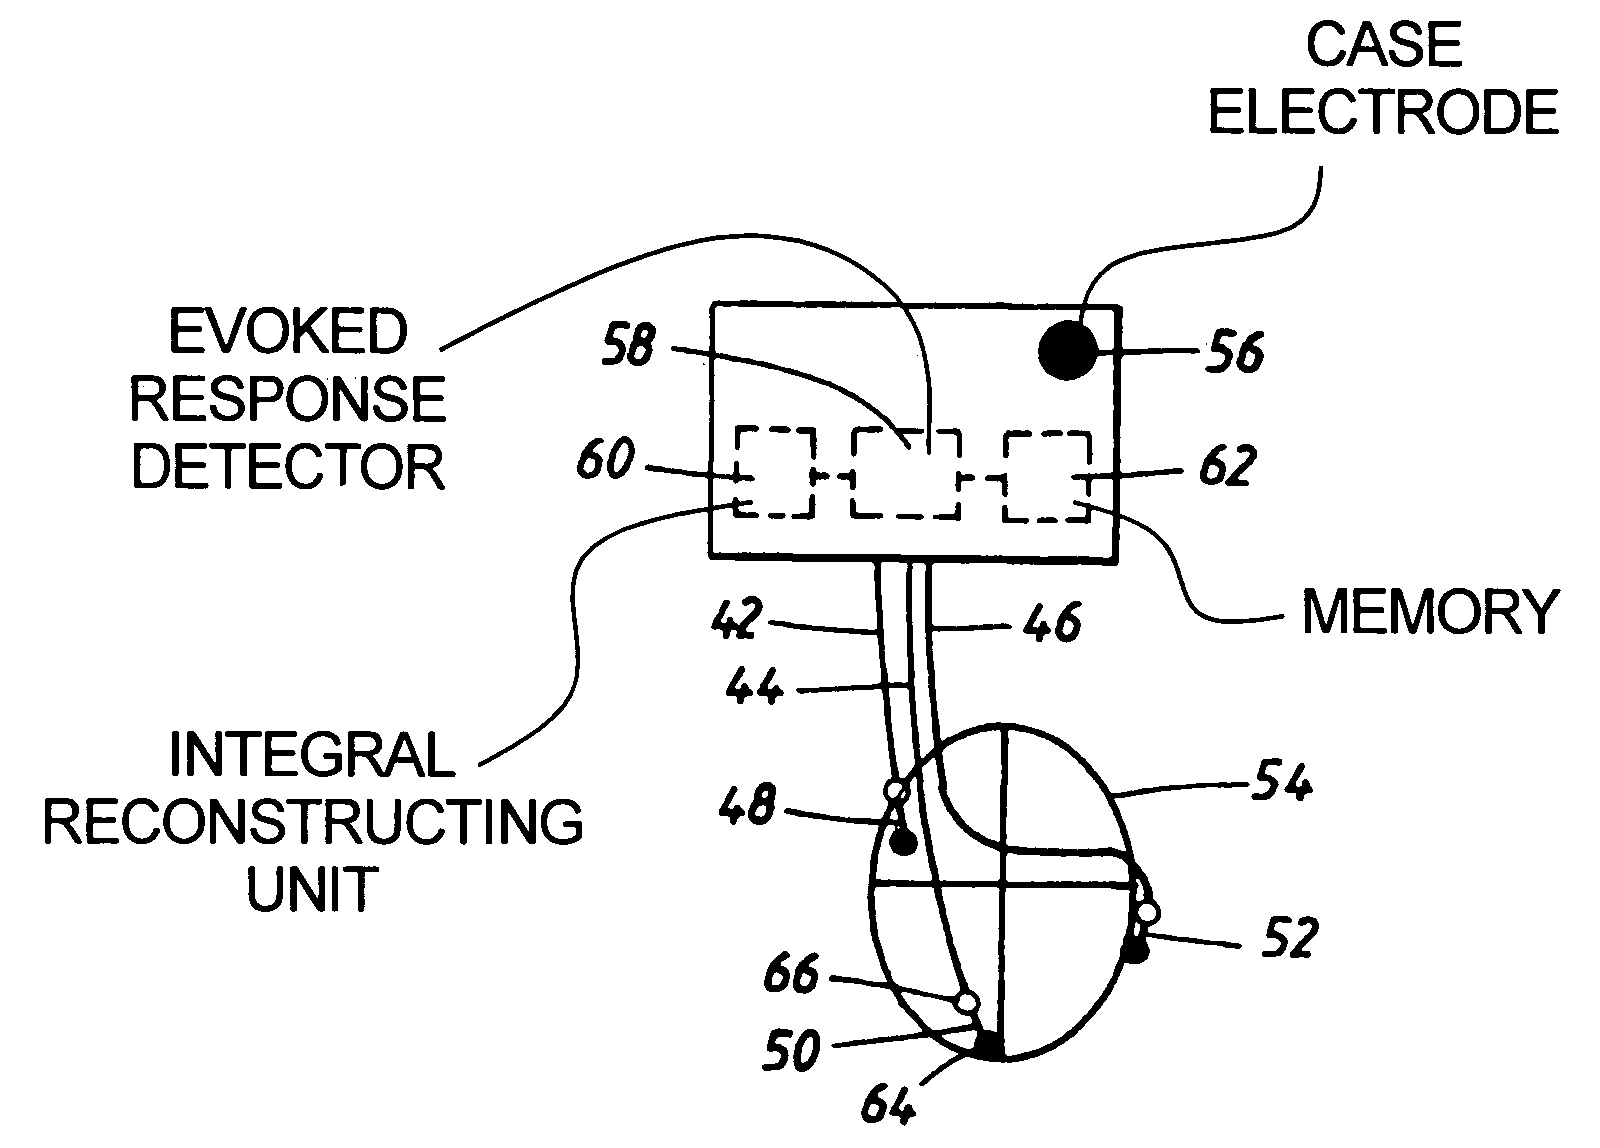 Multi-chamber pacing system